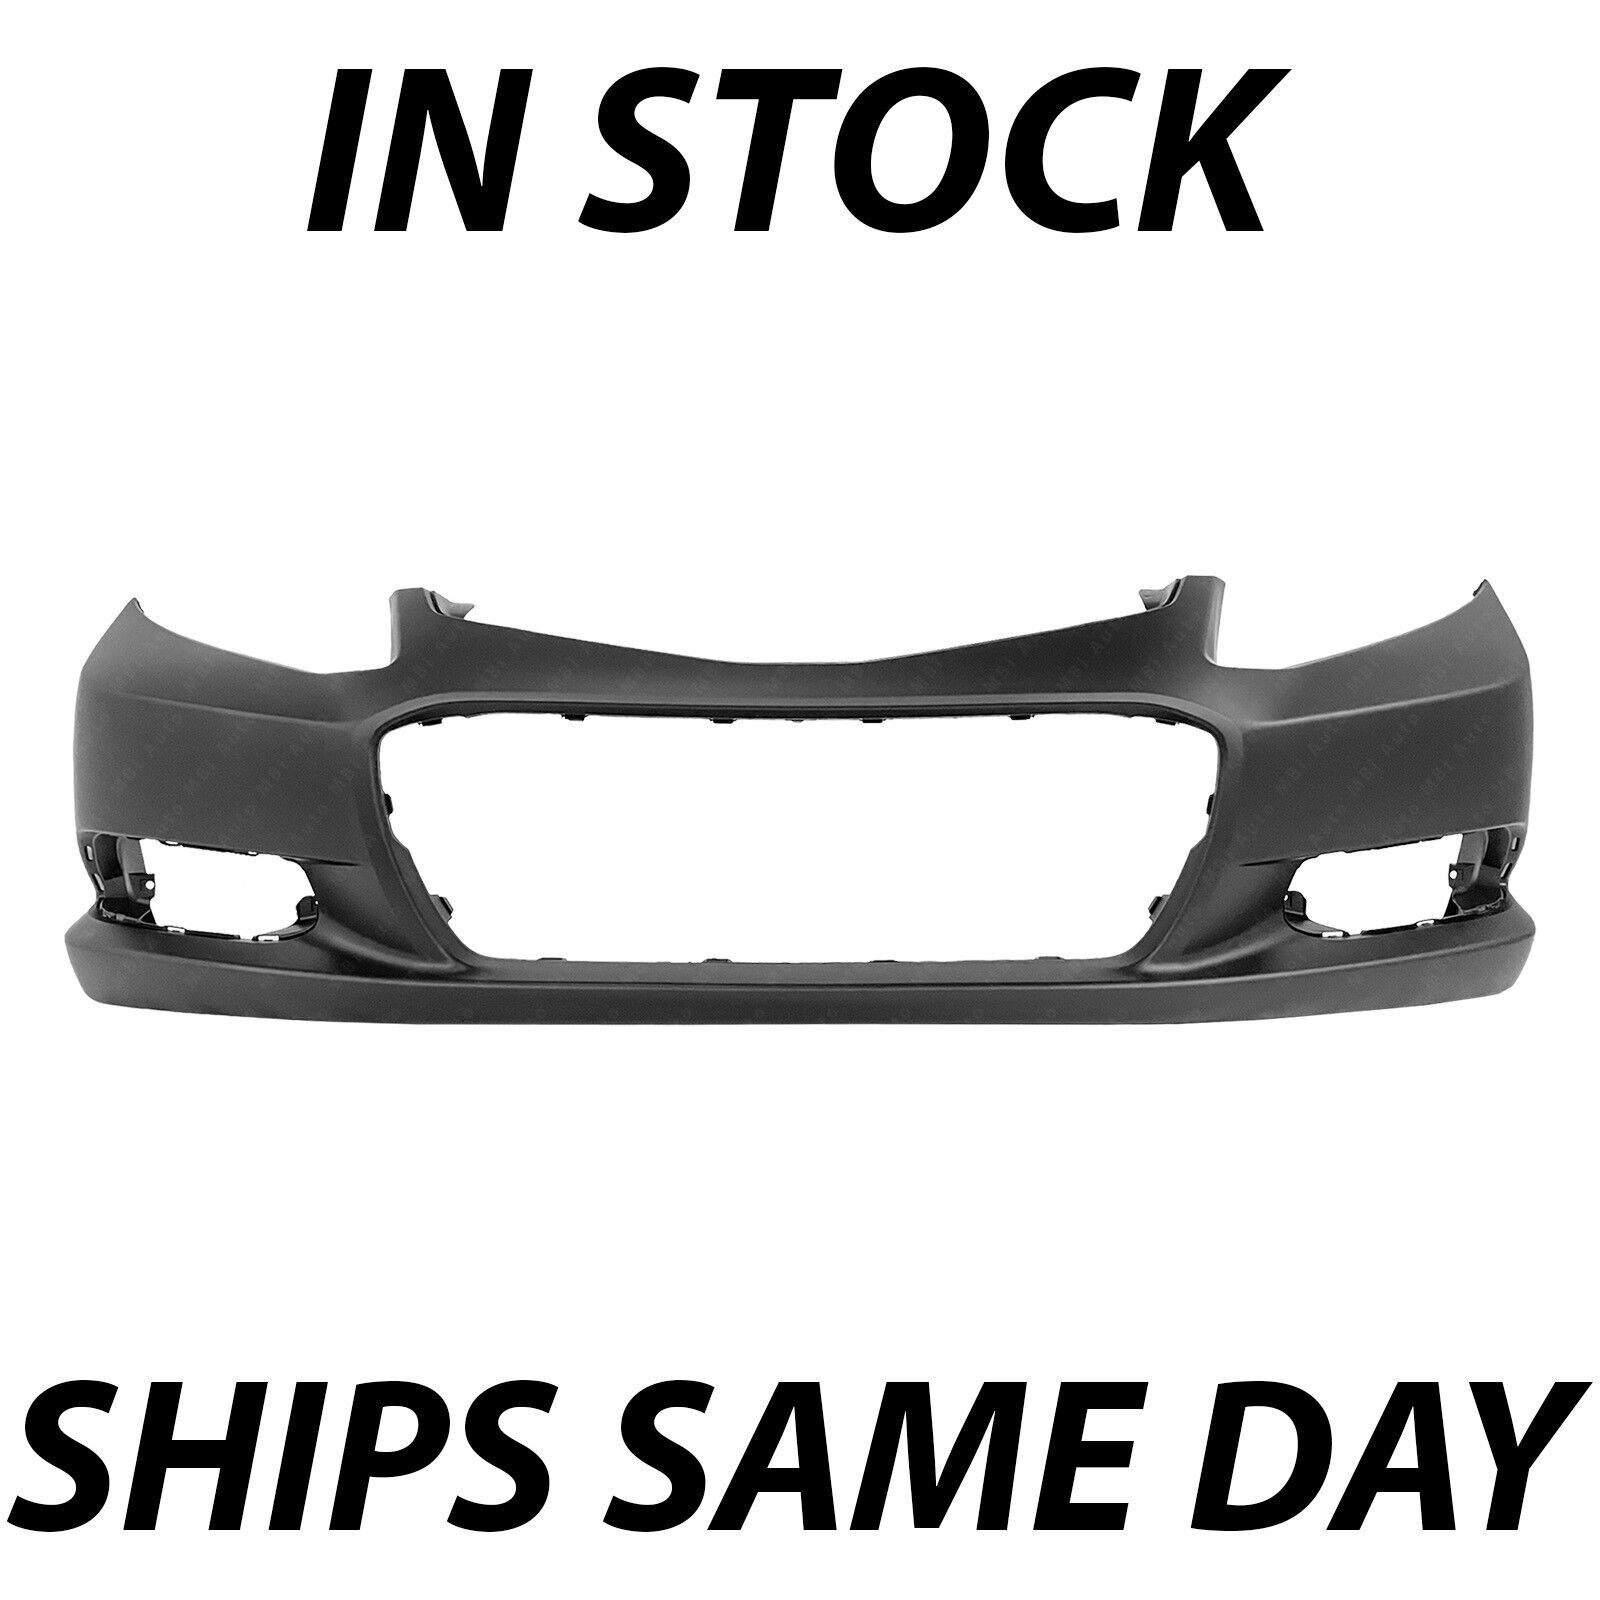 NEW Primered - Front Bumper Cover for 2012 2013 Honda Civic Coupe 2-Door 12 13